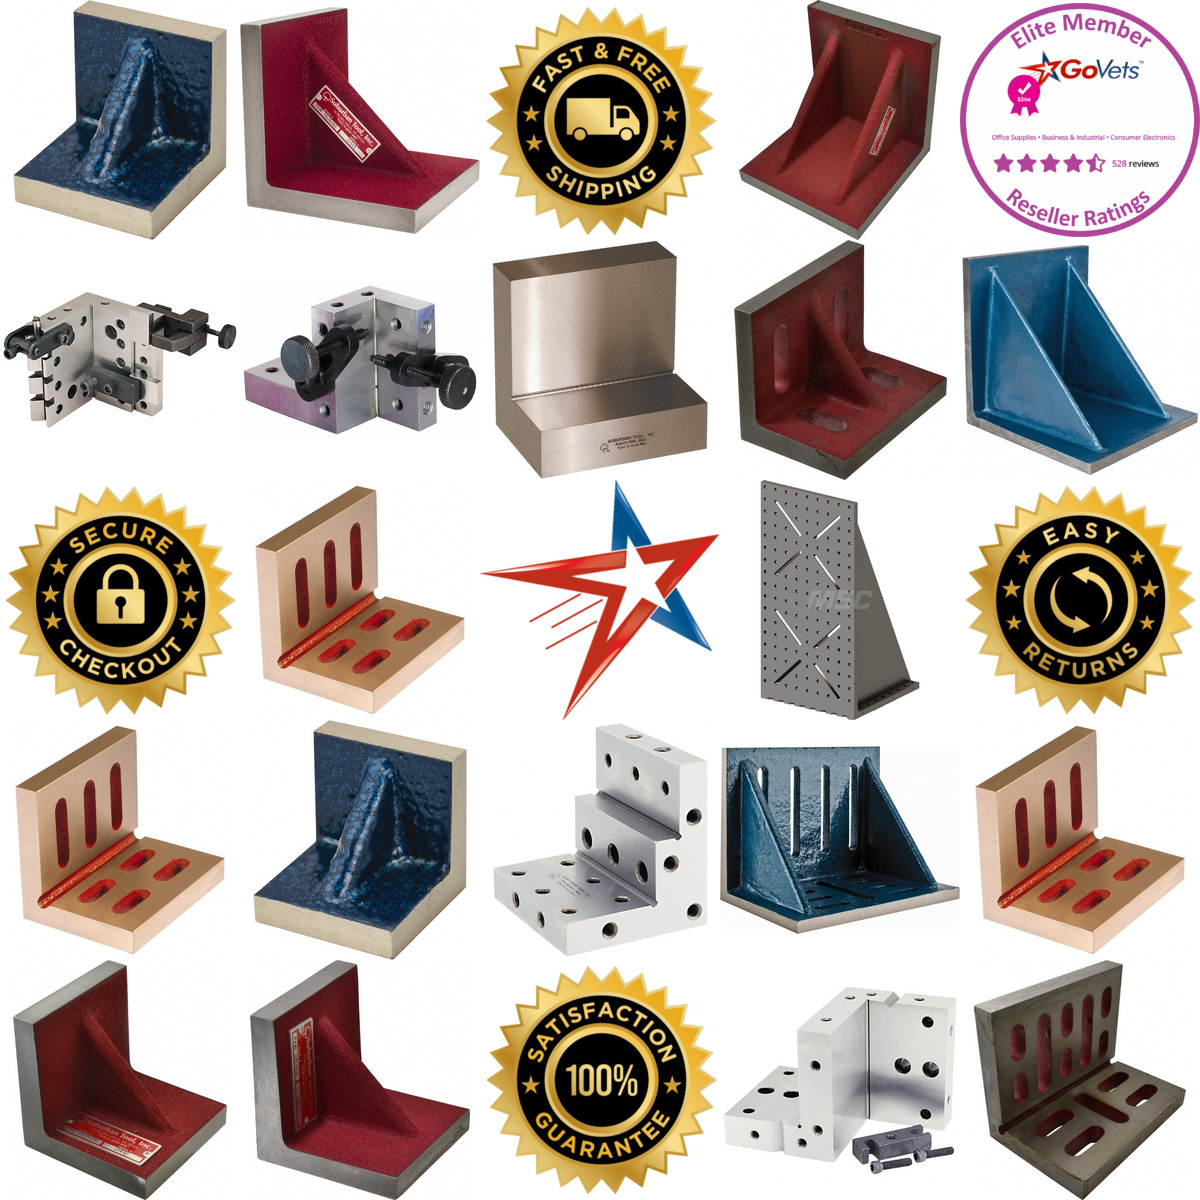 A selection of Angle Plates products on GoVets